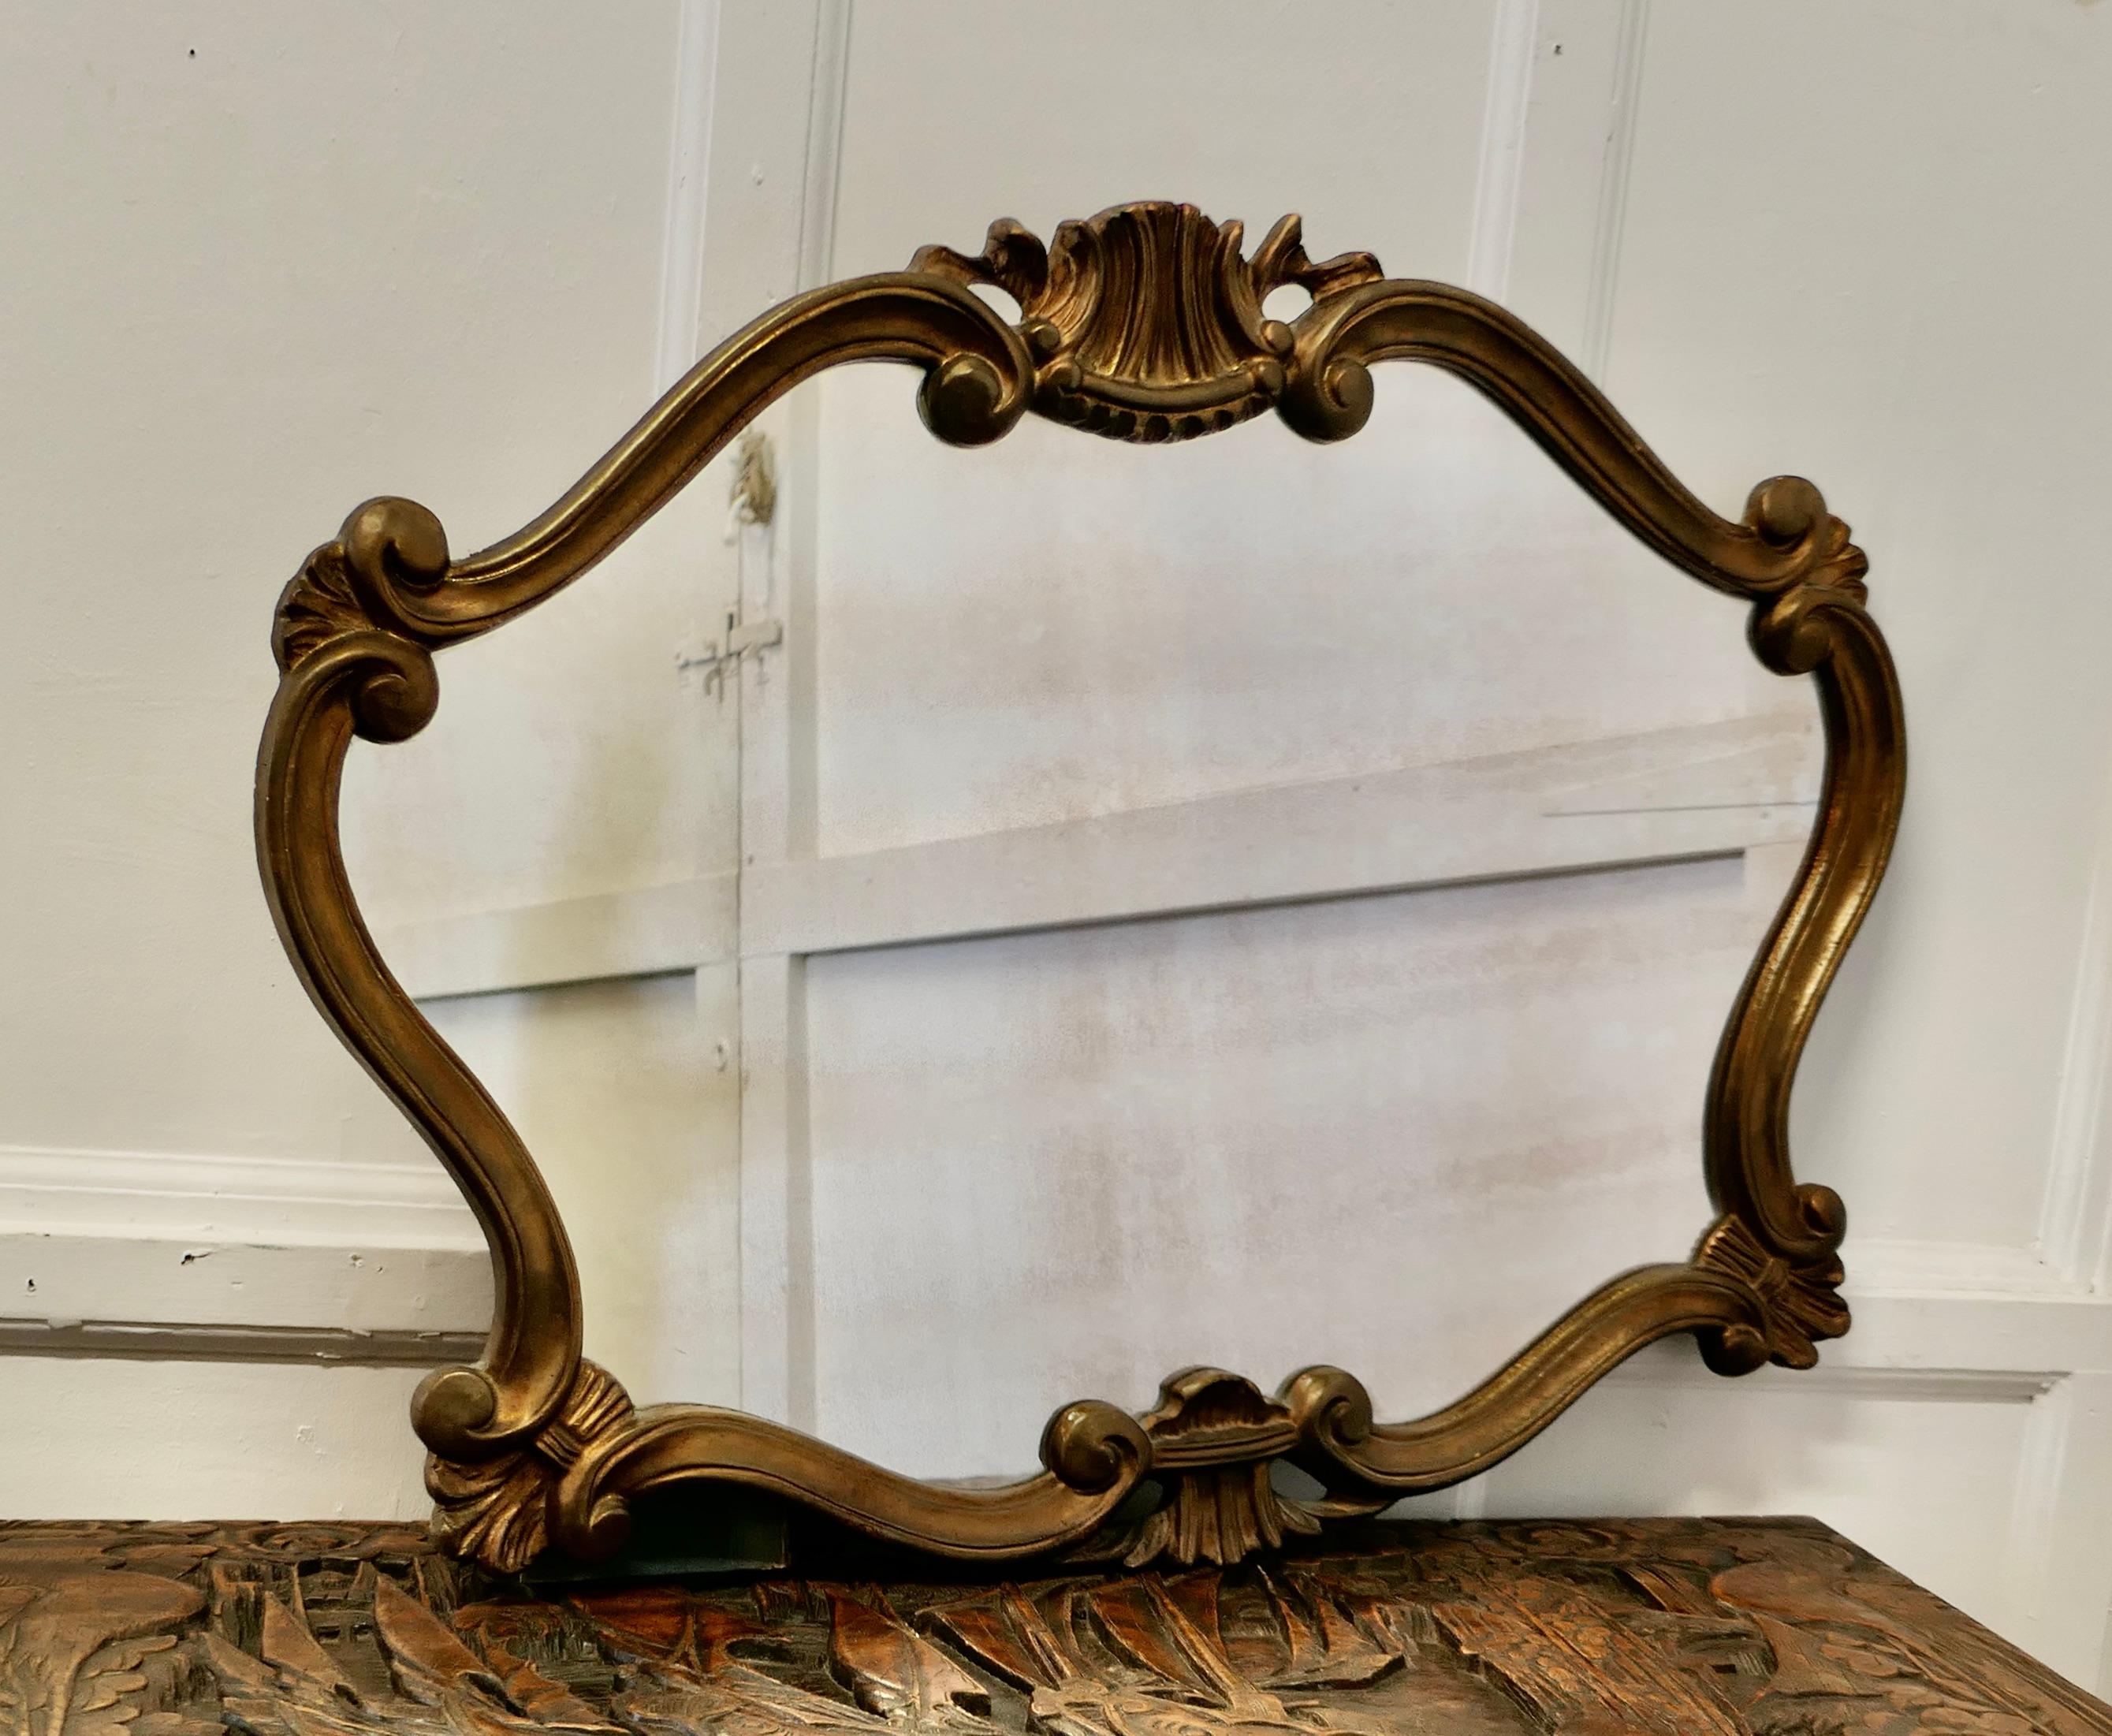 Superb French gilt scallop shaped overmantel 

This is a Striking piece it has a scroll shape with curved corners there is a carved shell decoration at the top with a wide border
The mirror is a lovely aged rich gold colour and would set off the